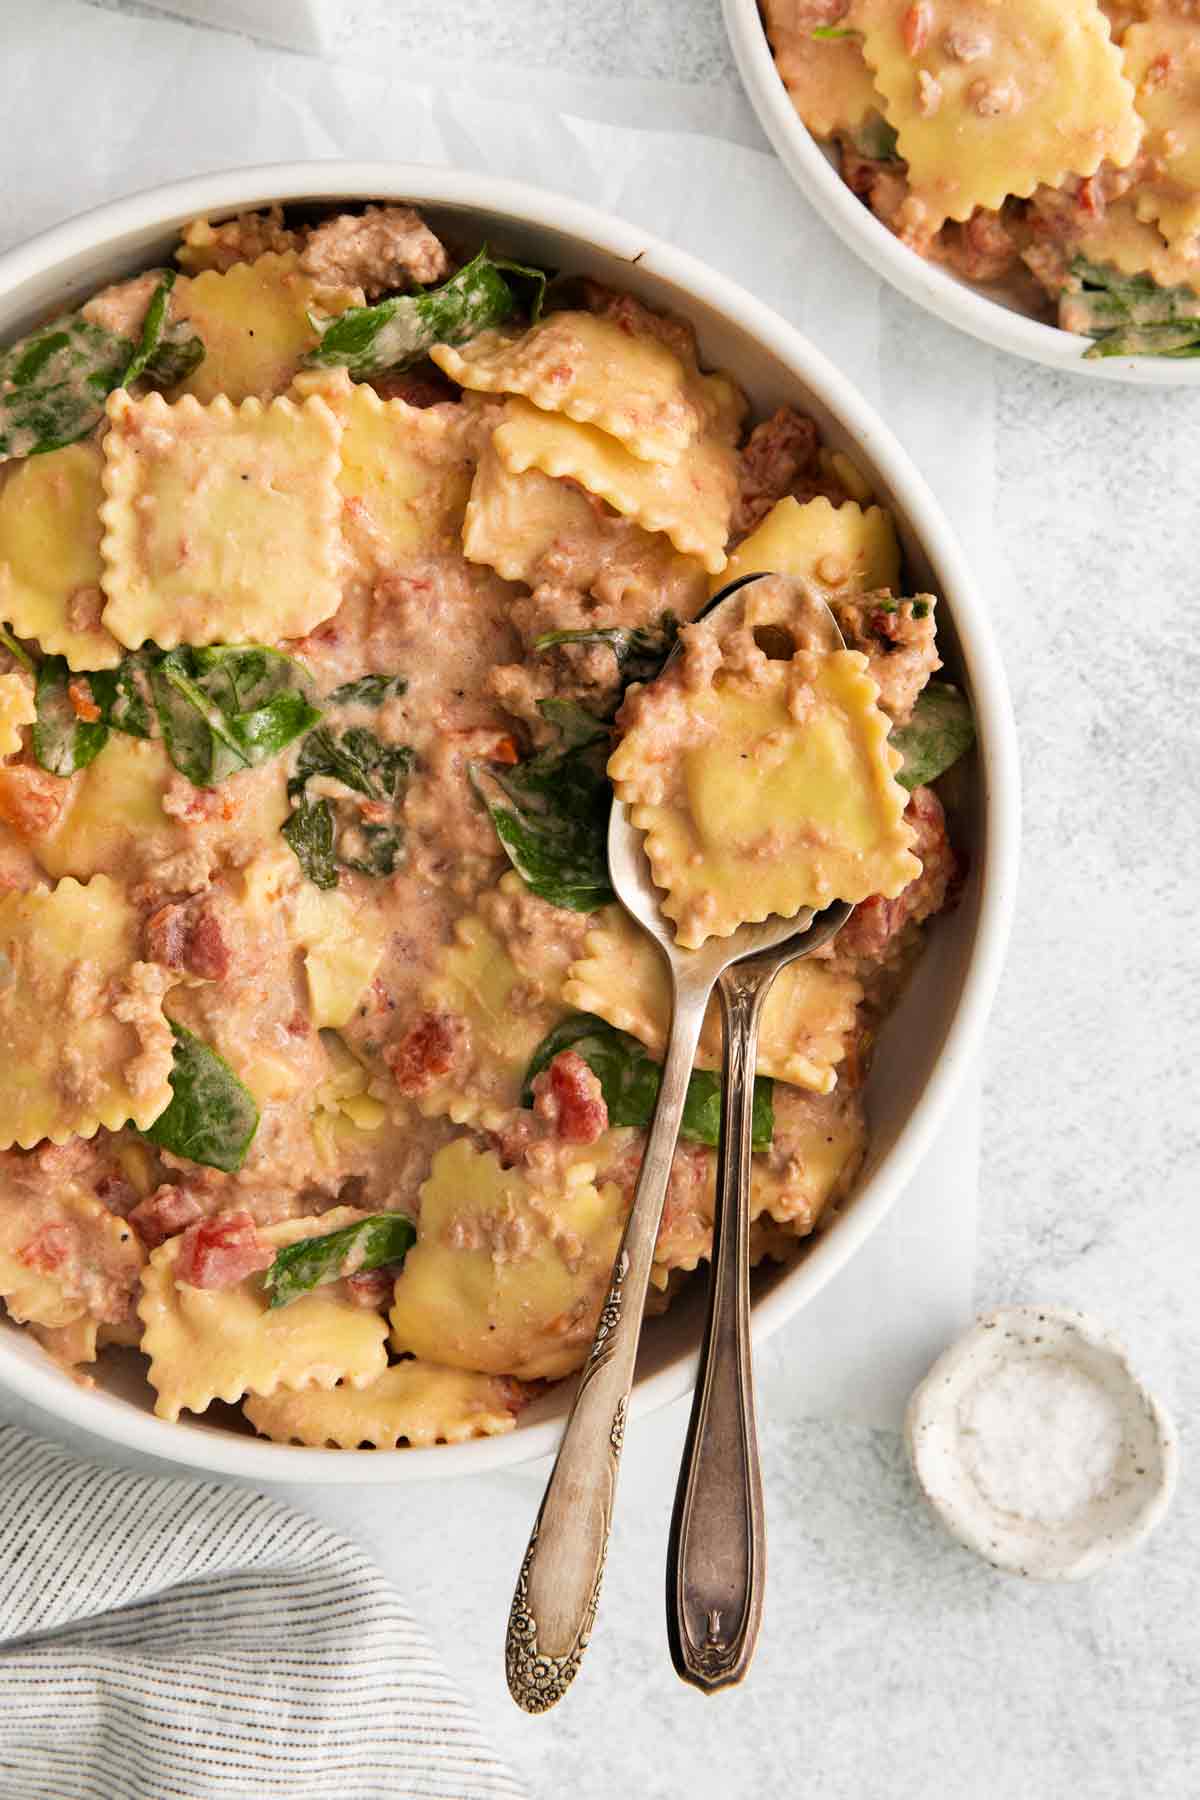 Easy Creamy Crockpot Ravioli with Spinach, Sauges and Tomoato